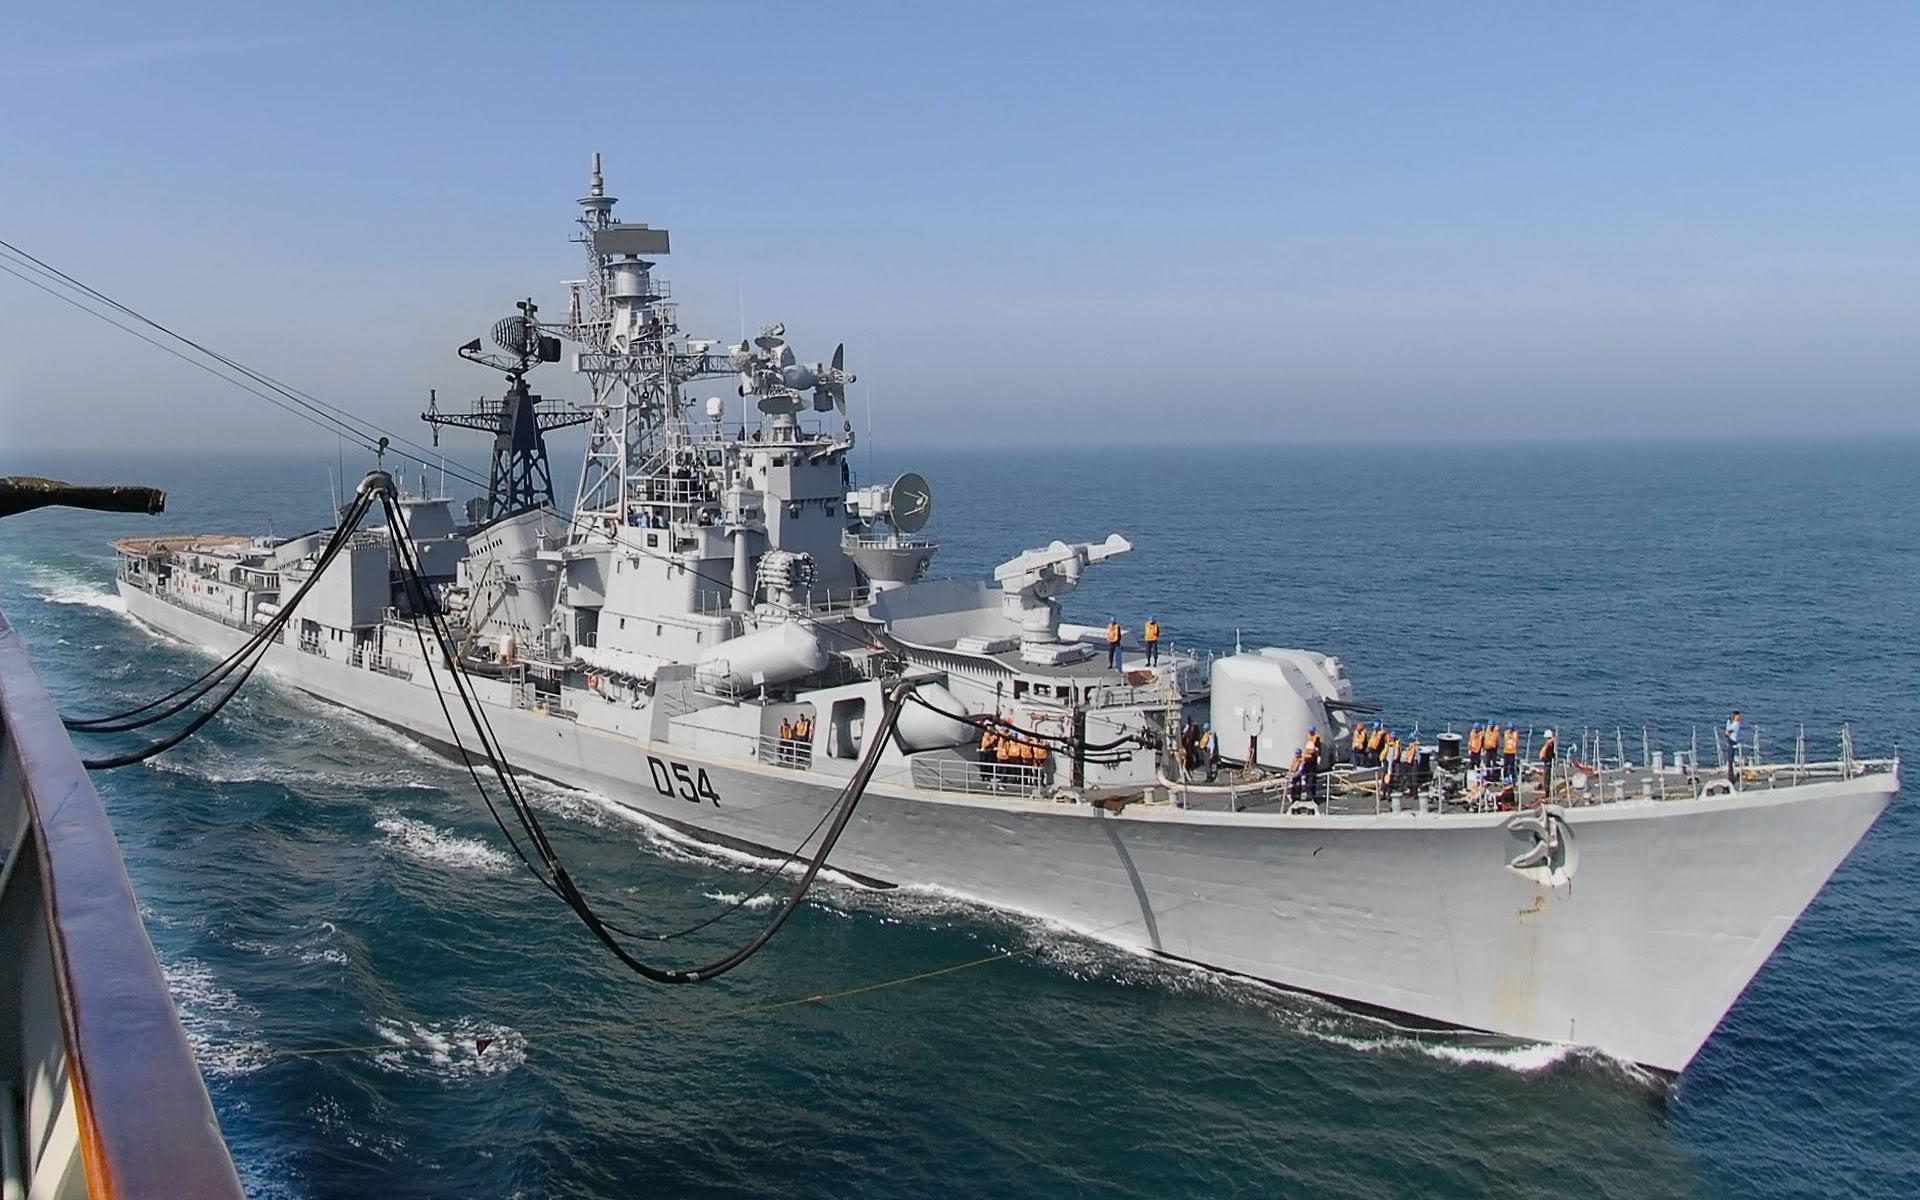 INS_Ranvir_(KASHIN_CLASS)_GUIDED_MISSILE_DESTROYER_Indra2_2005